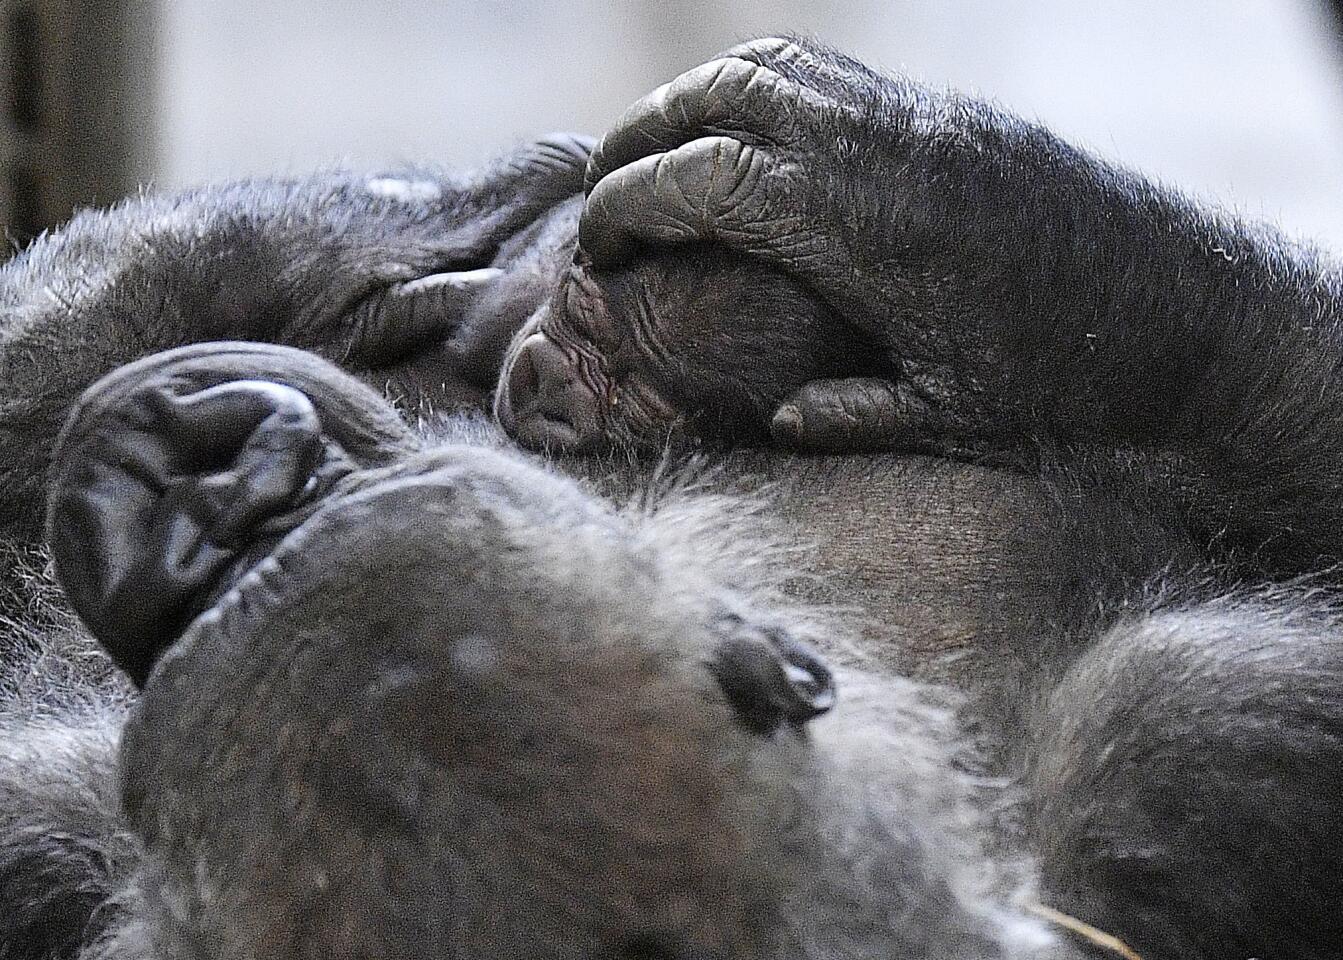 Gorilla mother Changa Maidi holds her baby a day after she gave birth to it at the zoo in Muenster, Germany, on Dec. 8, 2016. The animal keepers were surprised when they saw the newborn wet Gorilla baby because Changa's pregnancy was undiscovered until Dec. 7.